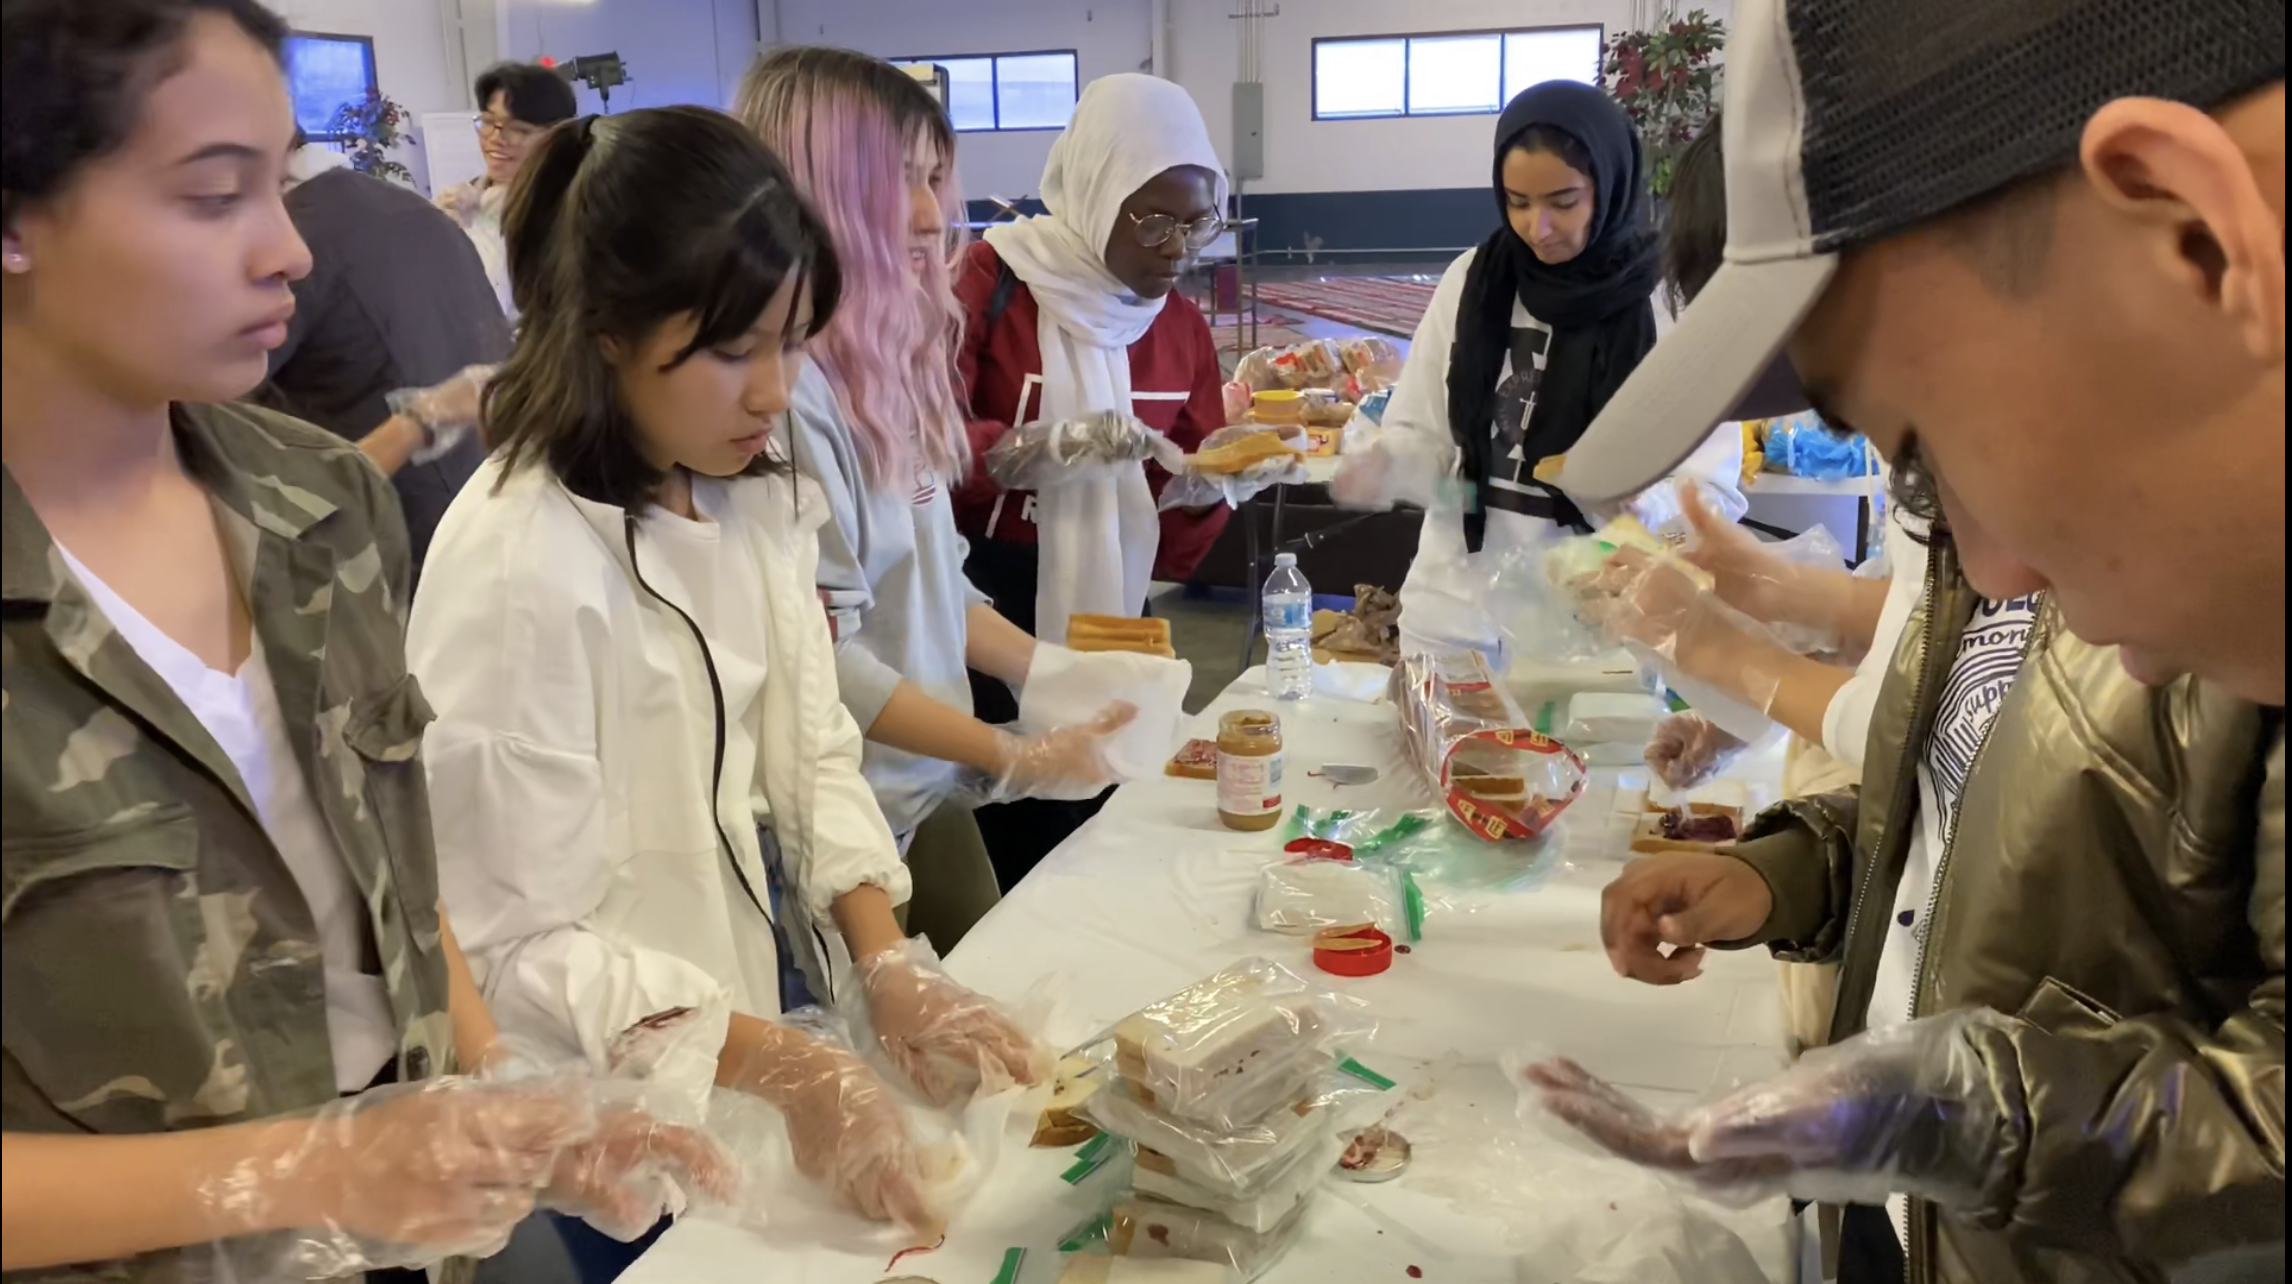 Youth making sandwiches and packing supplies for IslamInSpanish's 'Project Downtown' outreach event providing essentials for the homeless of downtown Houston, TX.